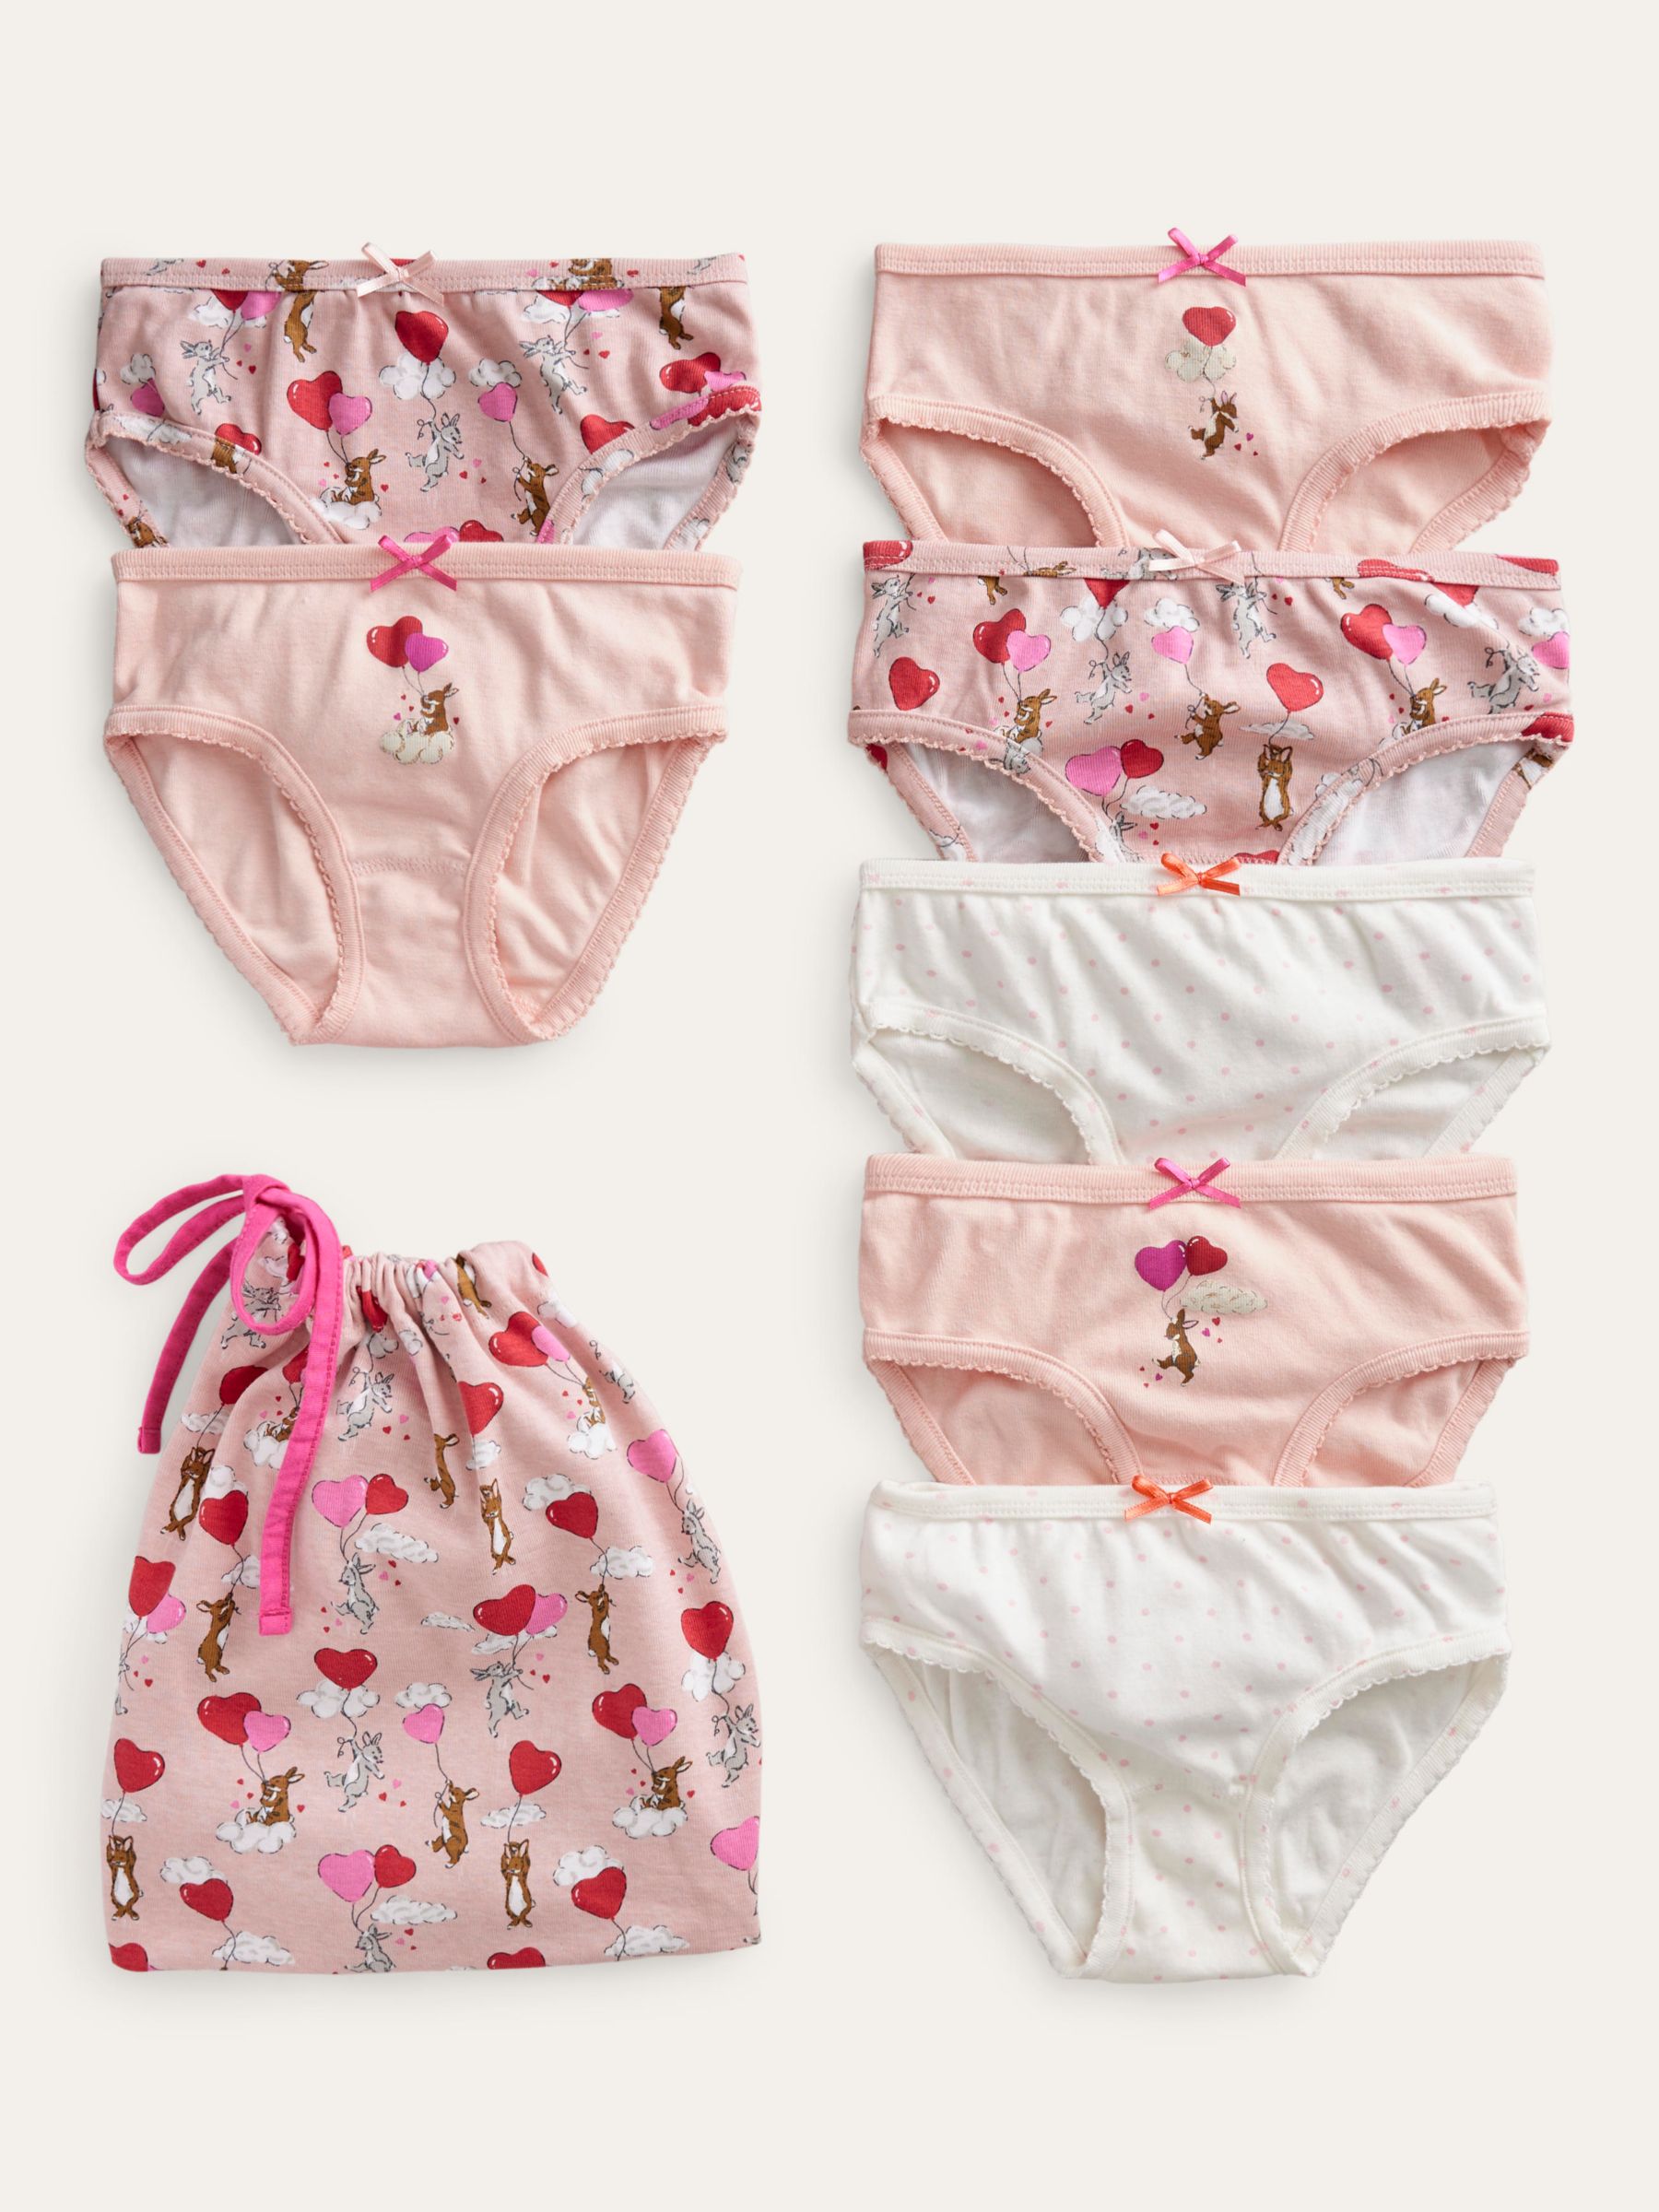 Mini Boden Kids' Heart Knickers, Pack of 7, Multi at John Lewis